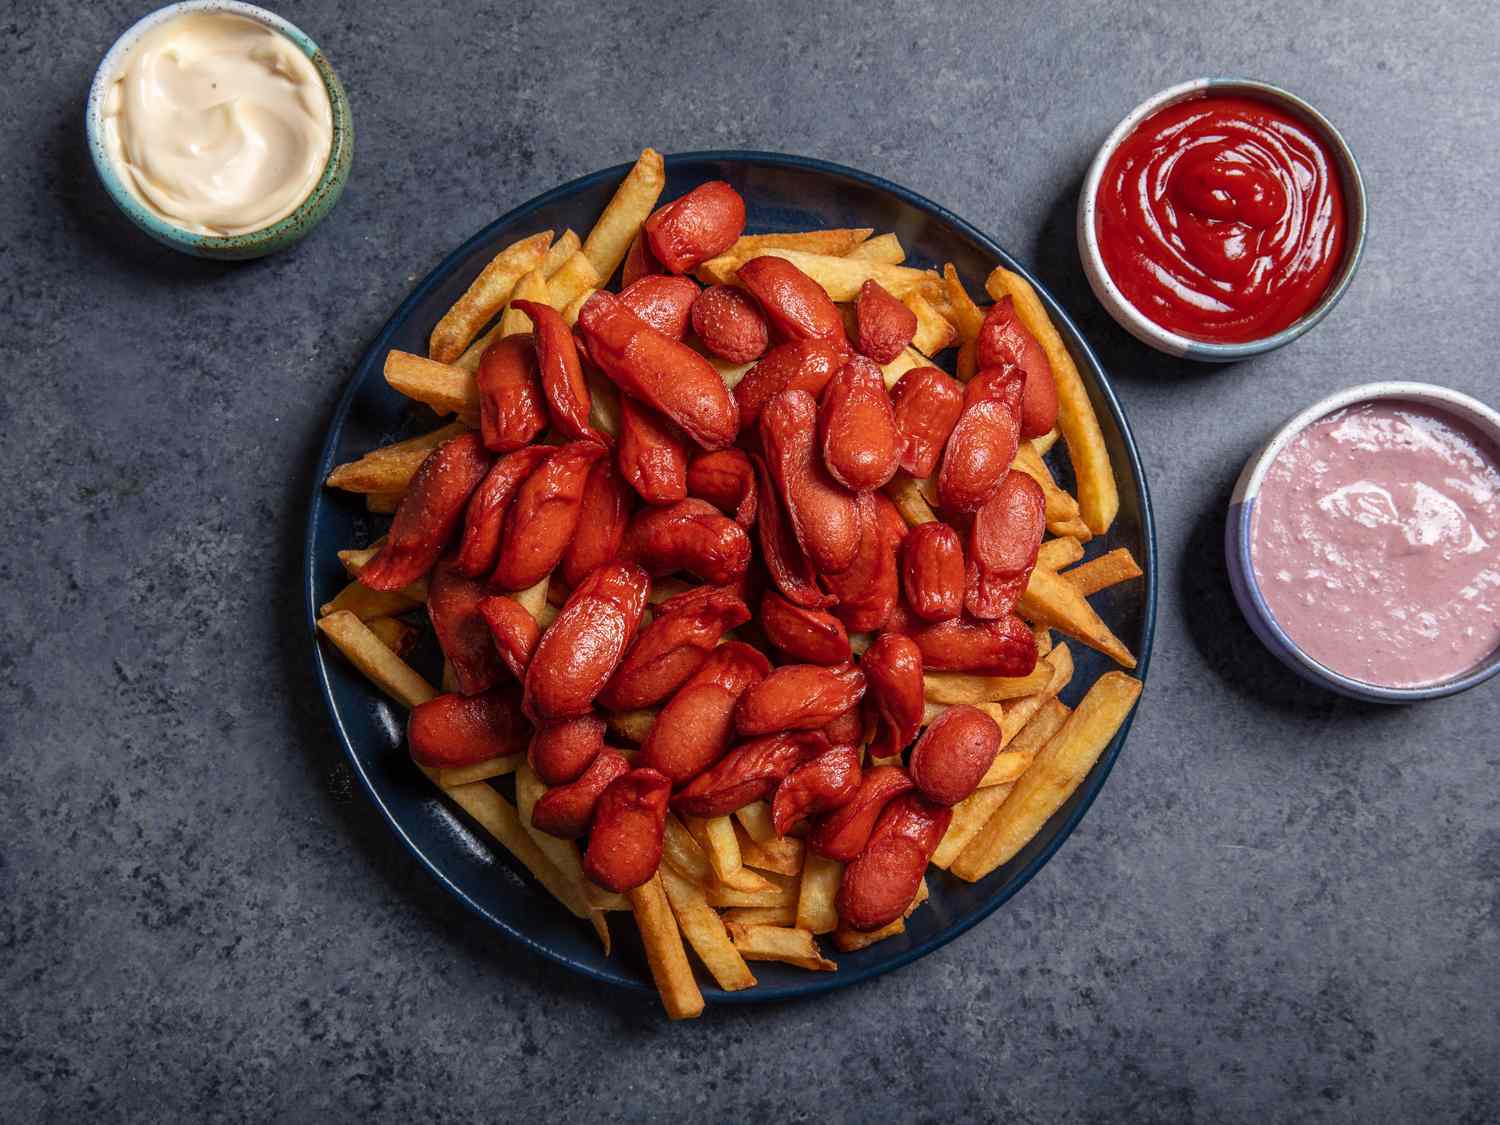 A large platter of salchipapa (french fries with sliced hot dogs piled on top) and a few dipping sauces alongside